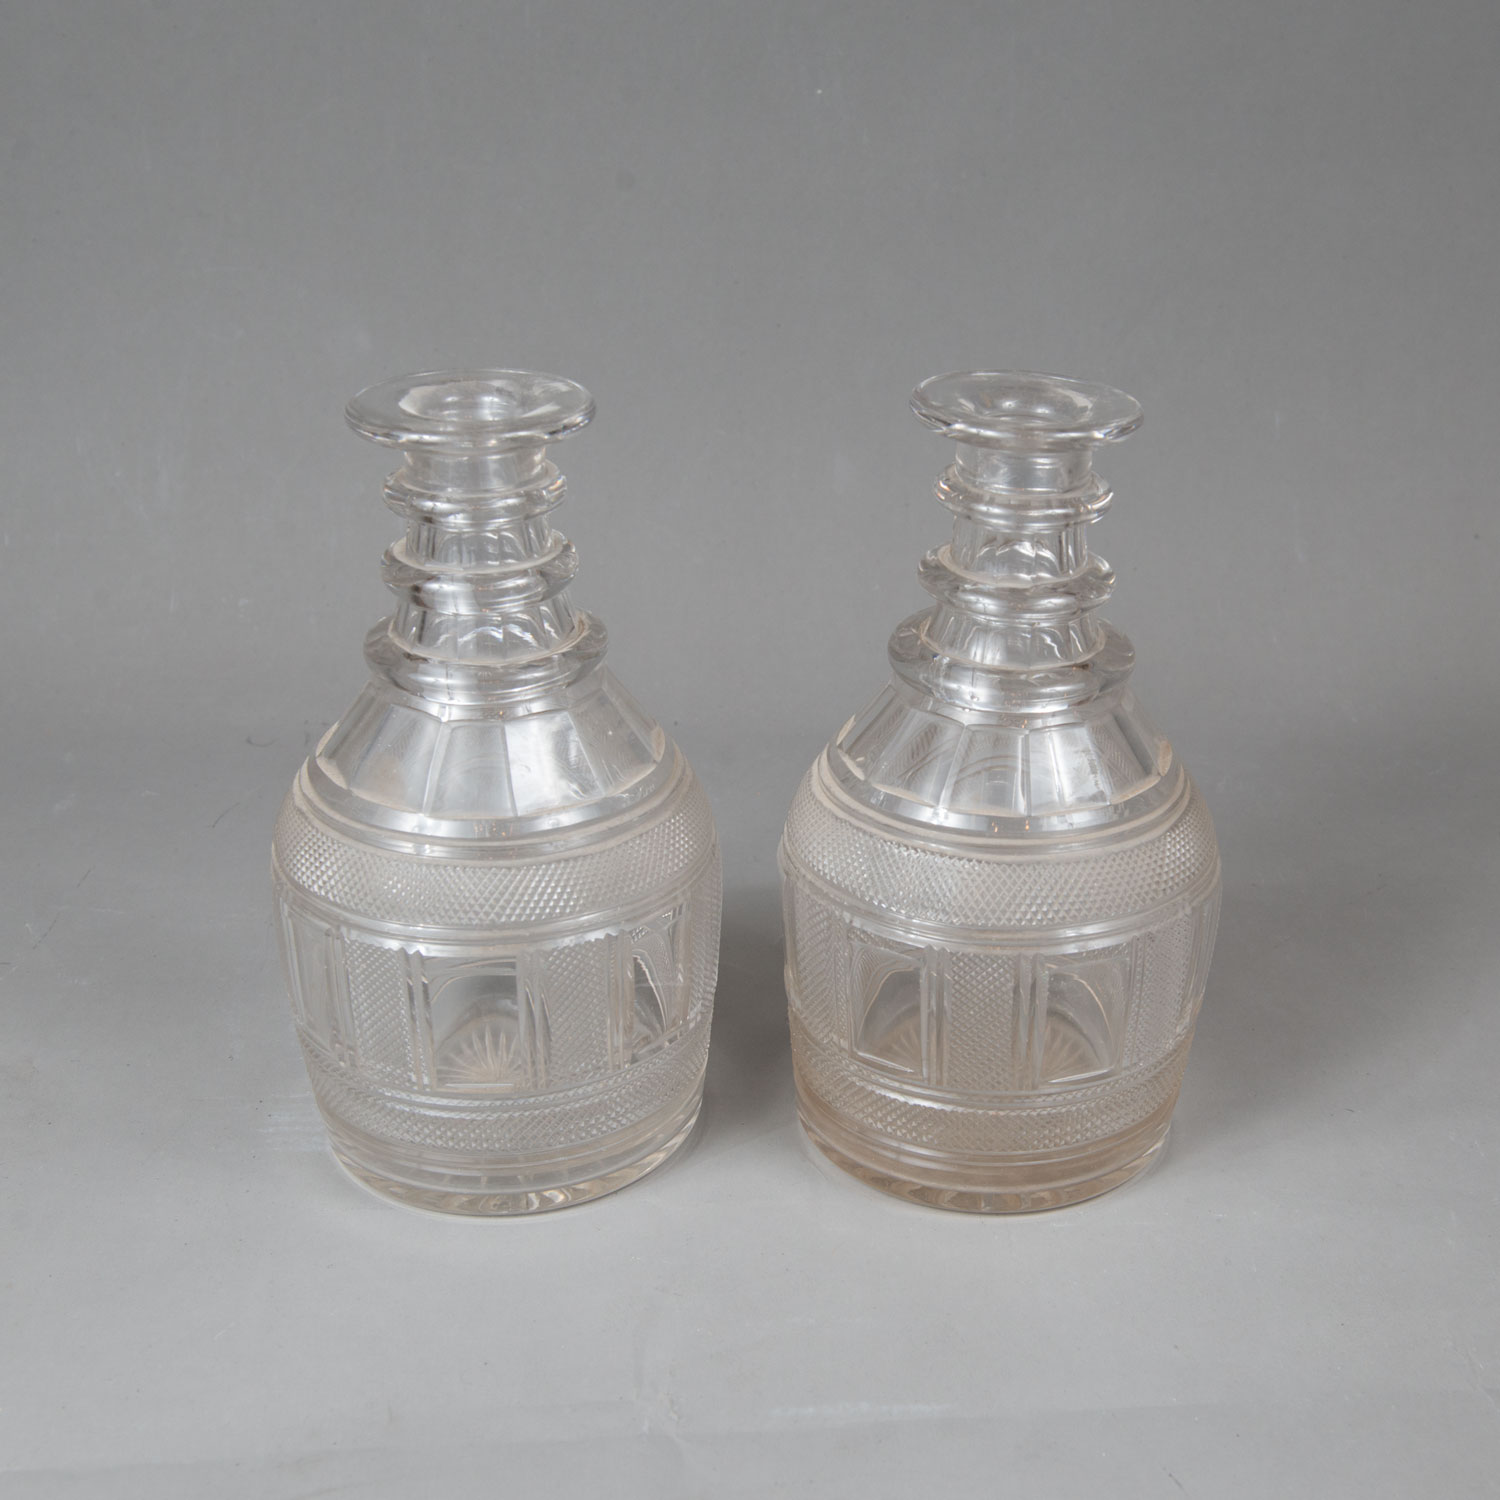 Pair of Empire Glass Flasks - Image 2 of 3